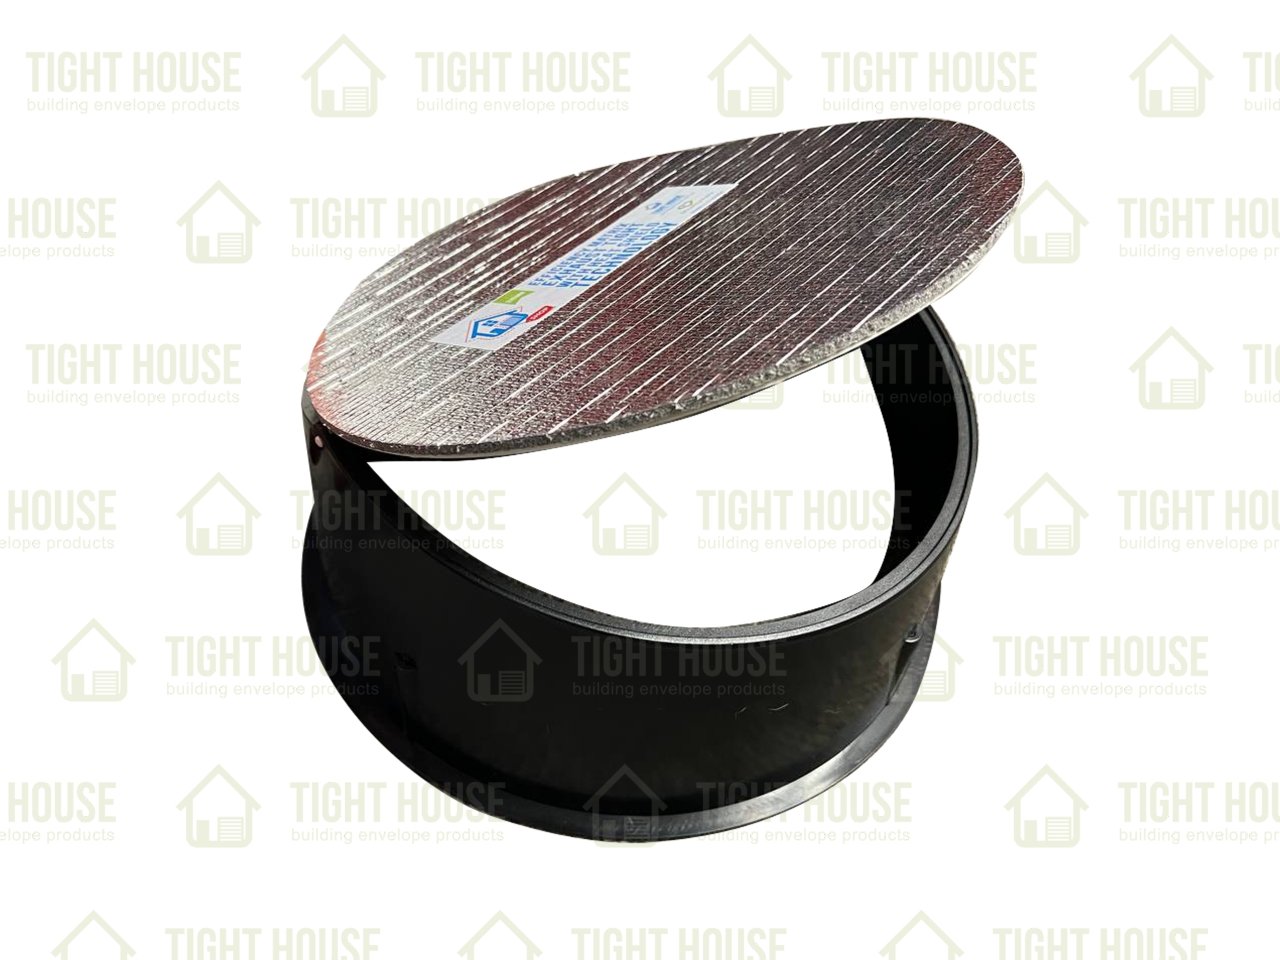 Exhaust Tight Fan Draught Stopper with Heat Shield Technology (320mm Diameter) - Tight House